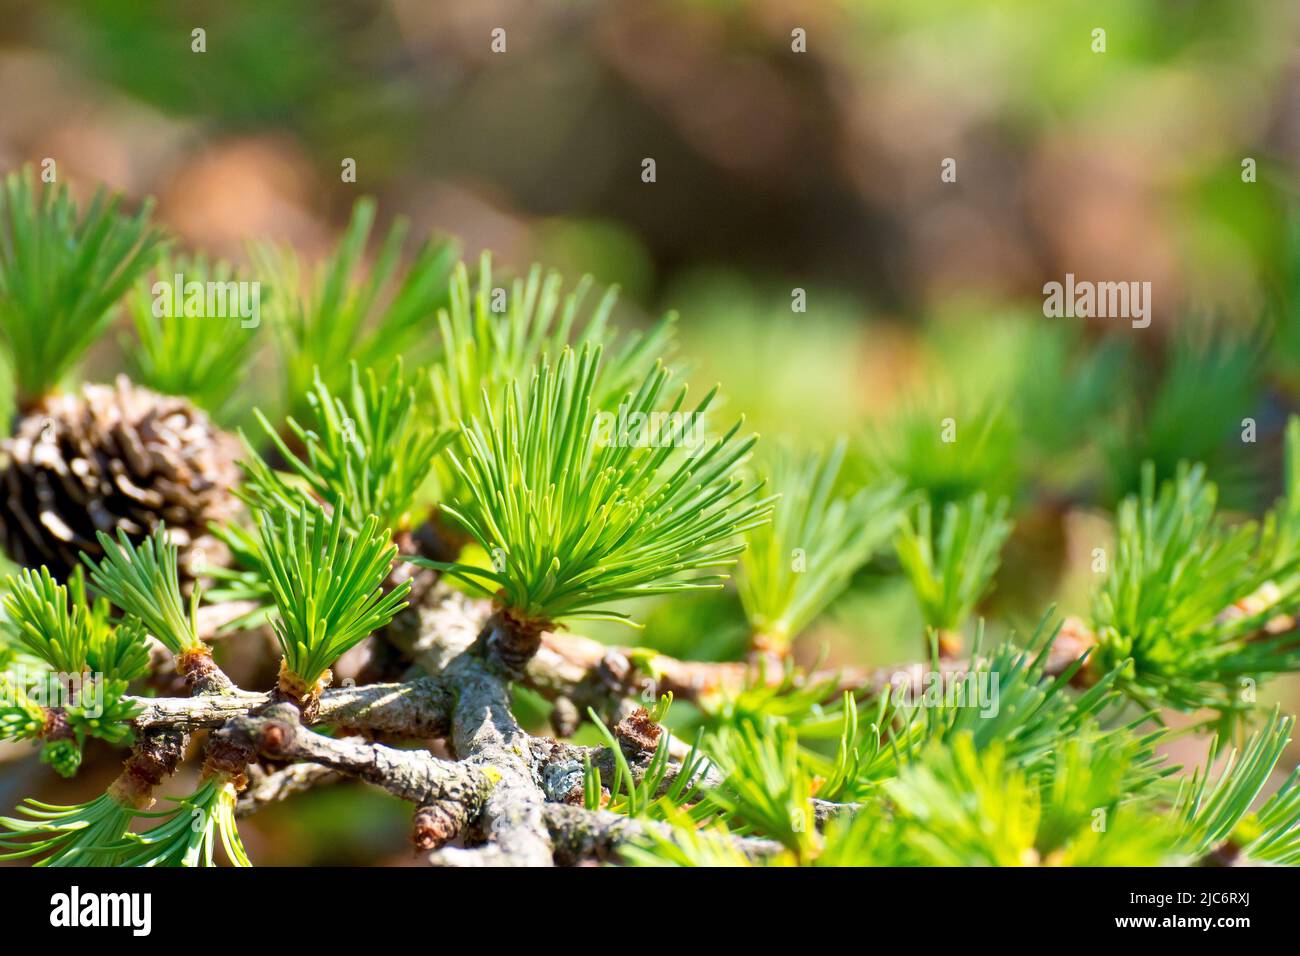 Larch, most likely Japanese Larch (larix kaempferi), close up showing fresh green needles or leaves sprouting from a branch of the tree in the spring. Stock Photo